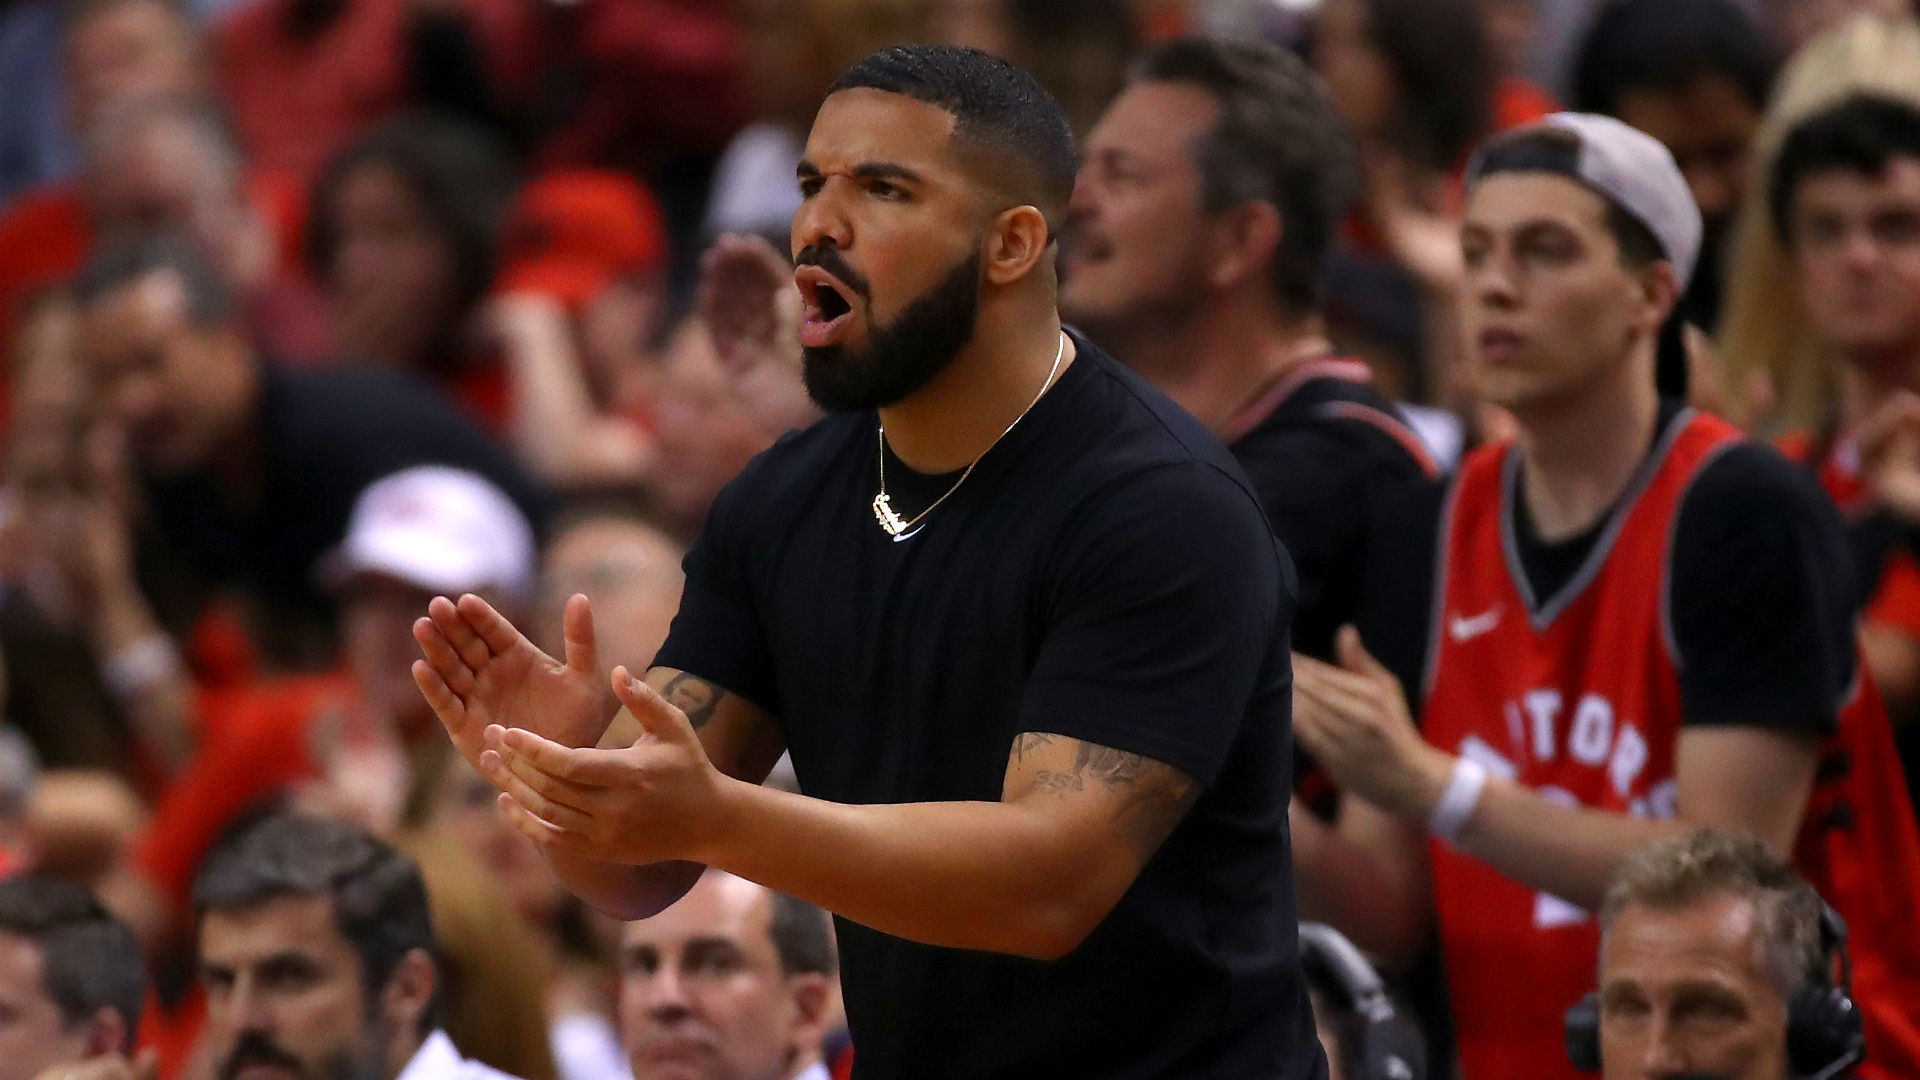 Drake has had altercations with Golden State Warriors players during the NBA Finals, but he had some supportive words for Kevin Durant.